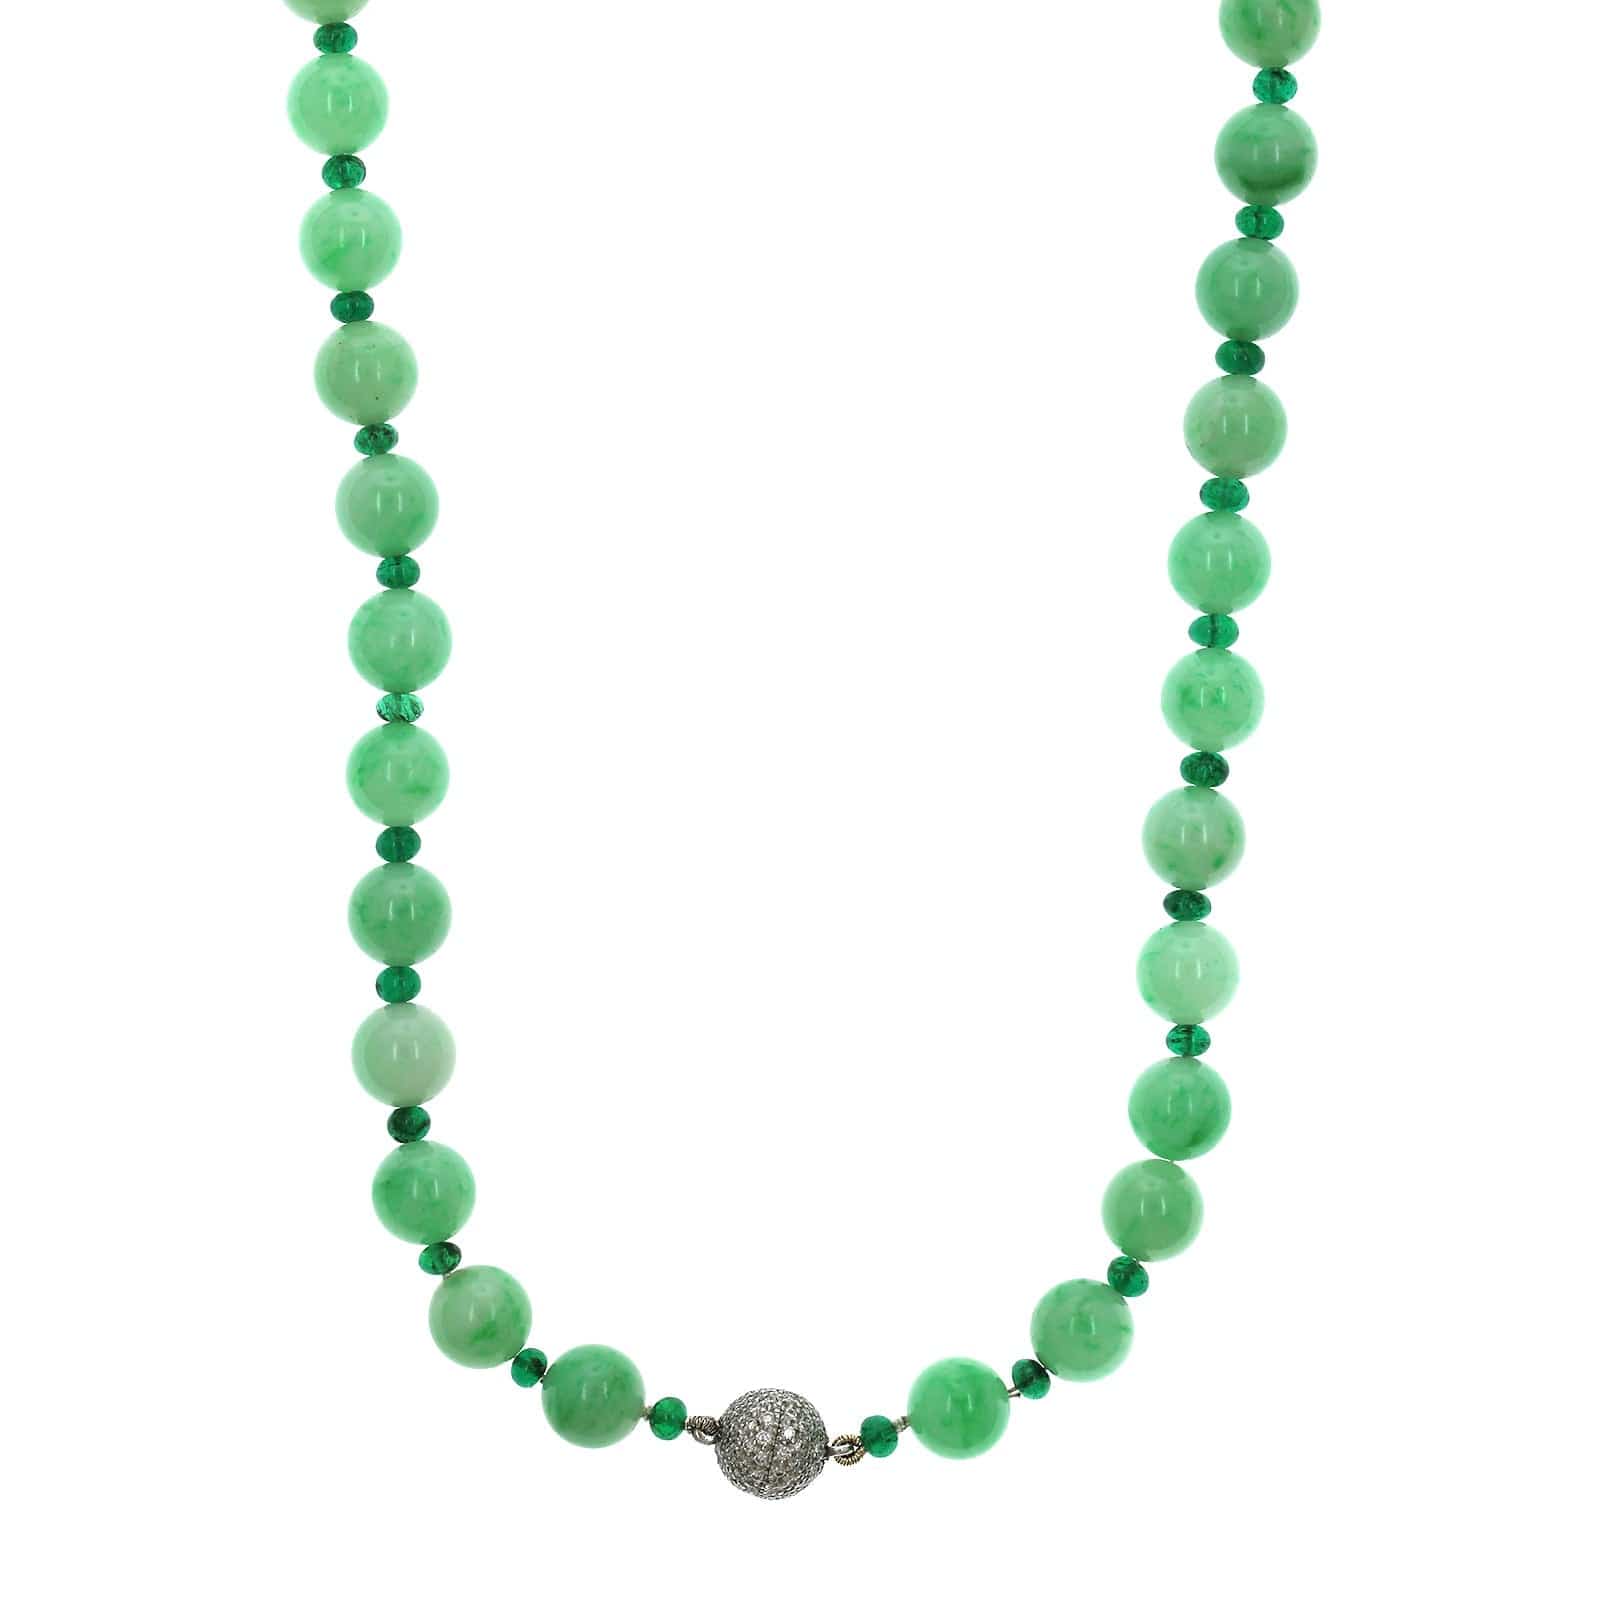 18K White Gold Jade and Emerald Bead Necklace, 18k white gold, Long's Jewelers